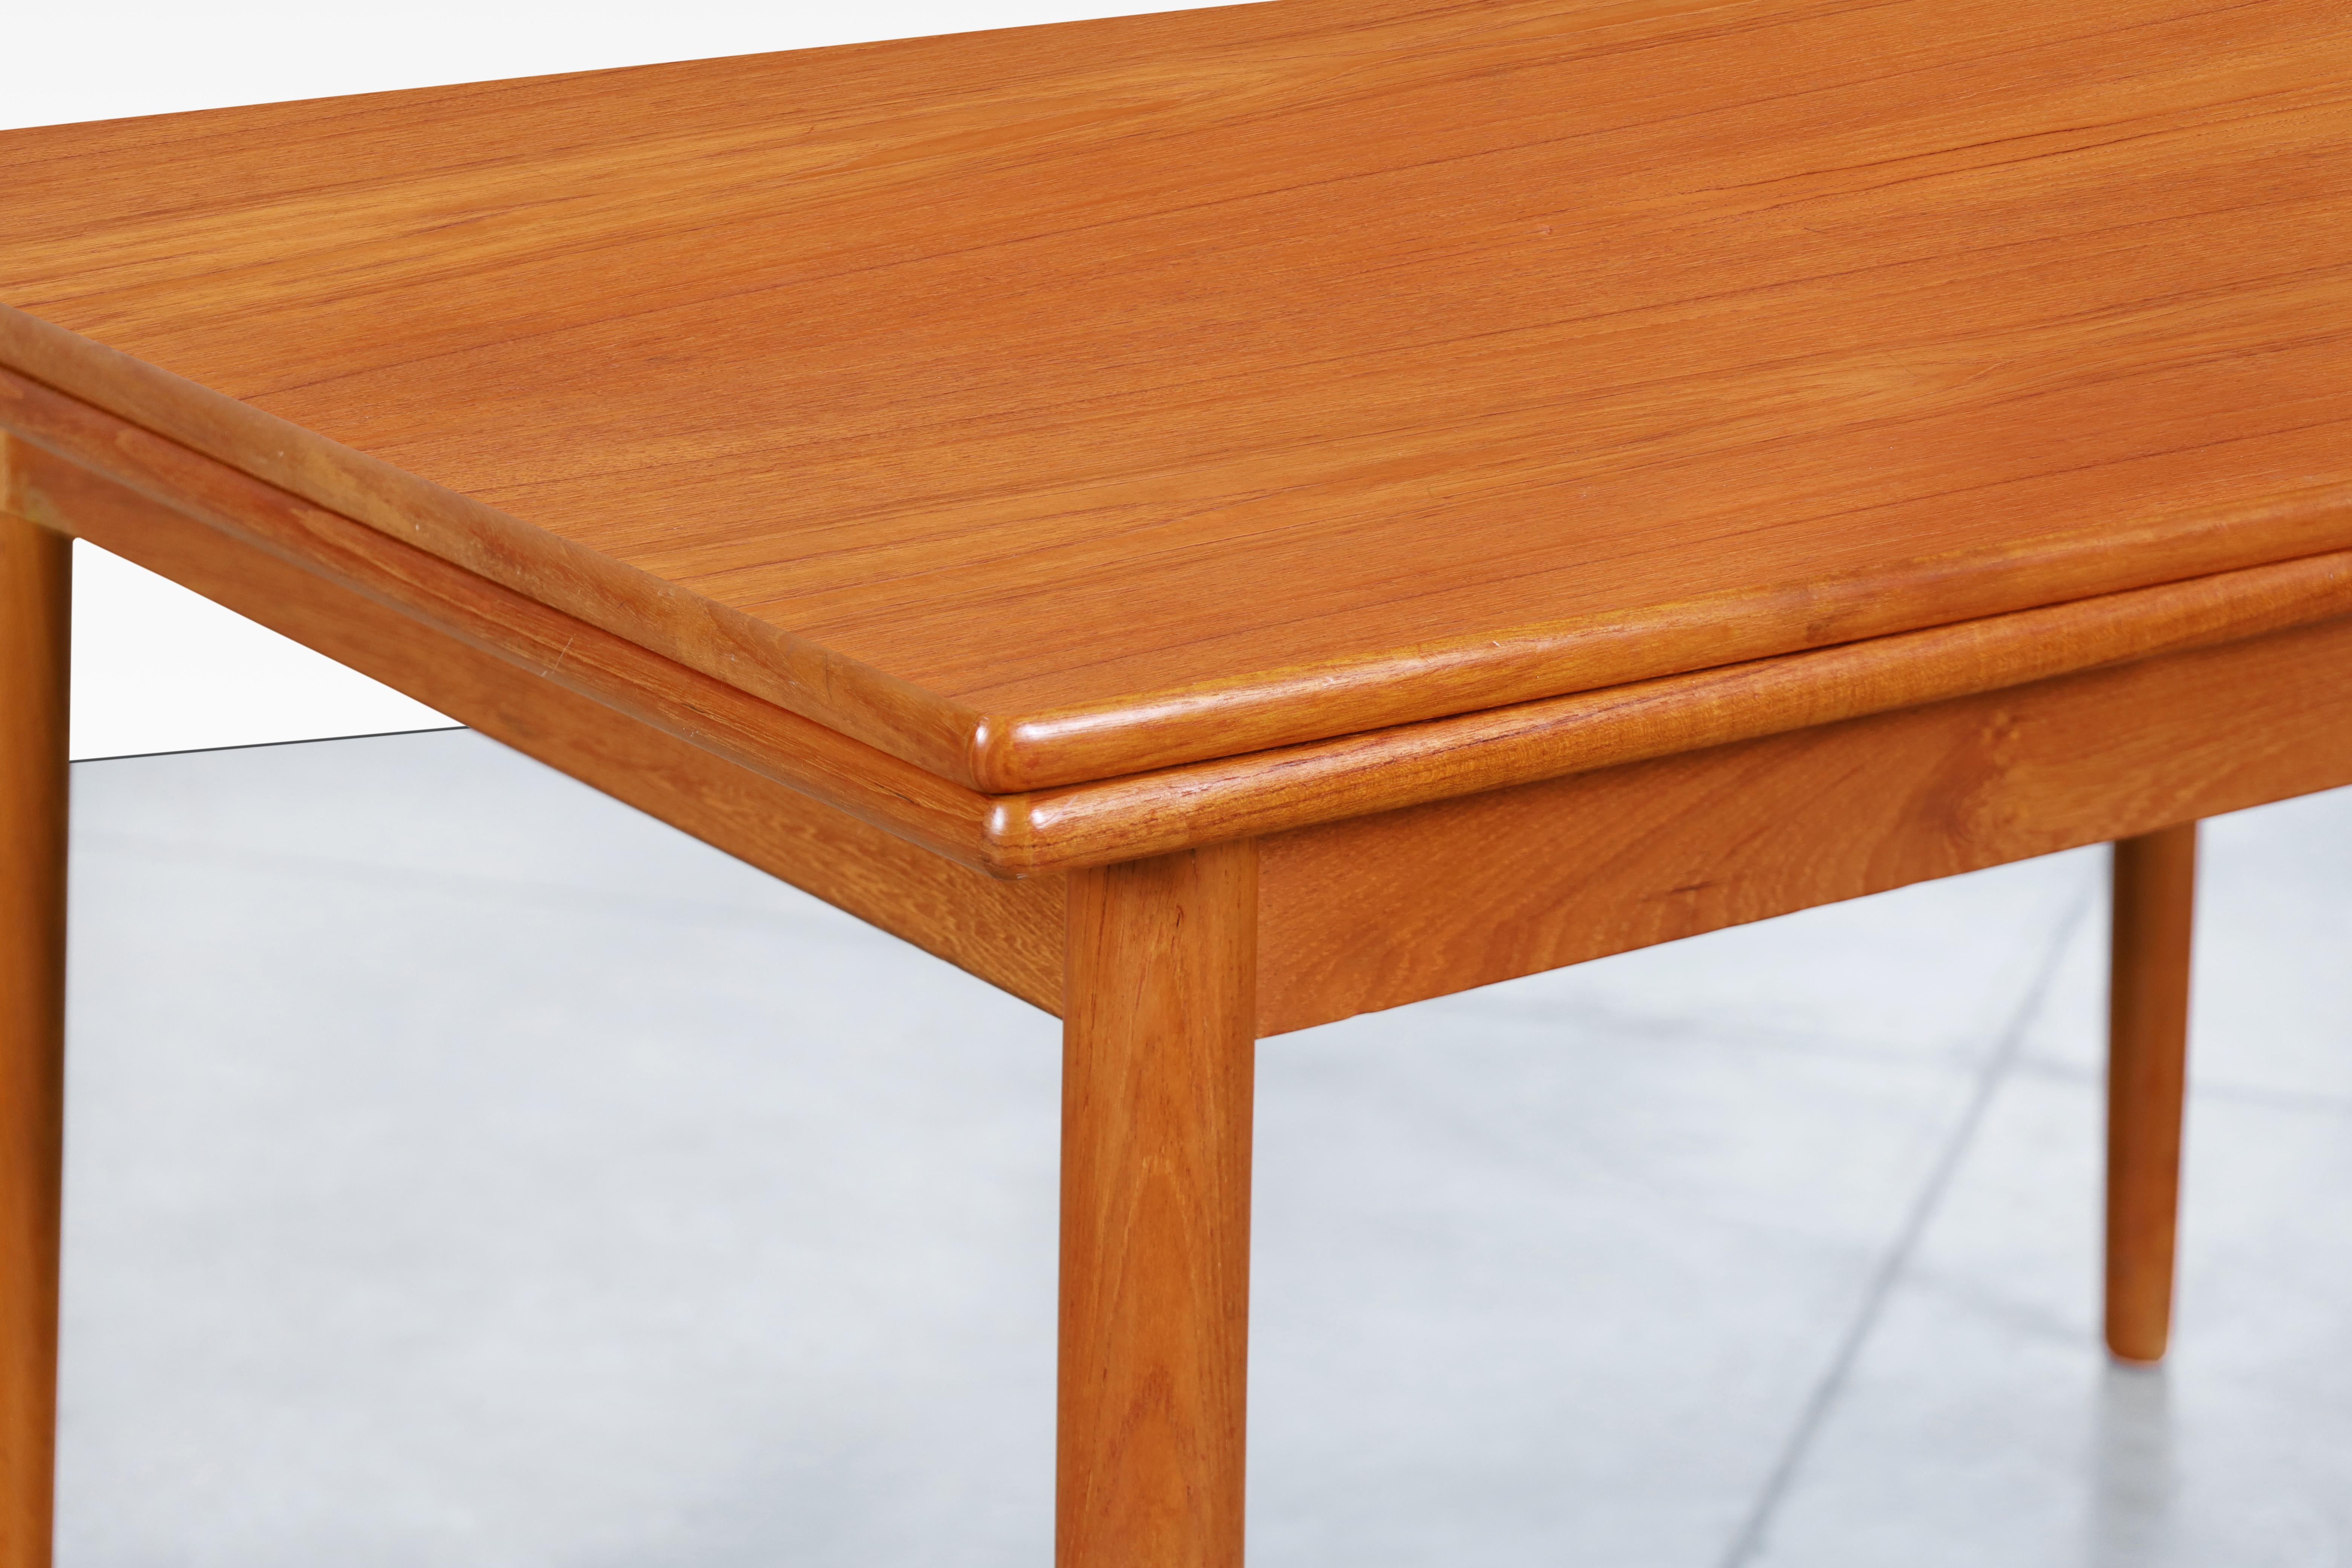 Mid-20th Century Danish Modern Expanding Teak Dining Table by AM Møble